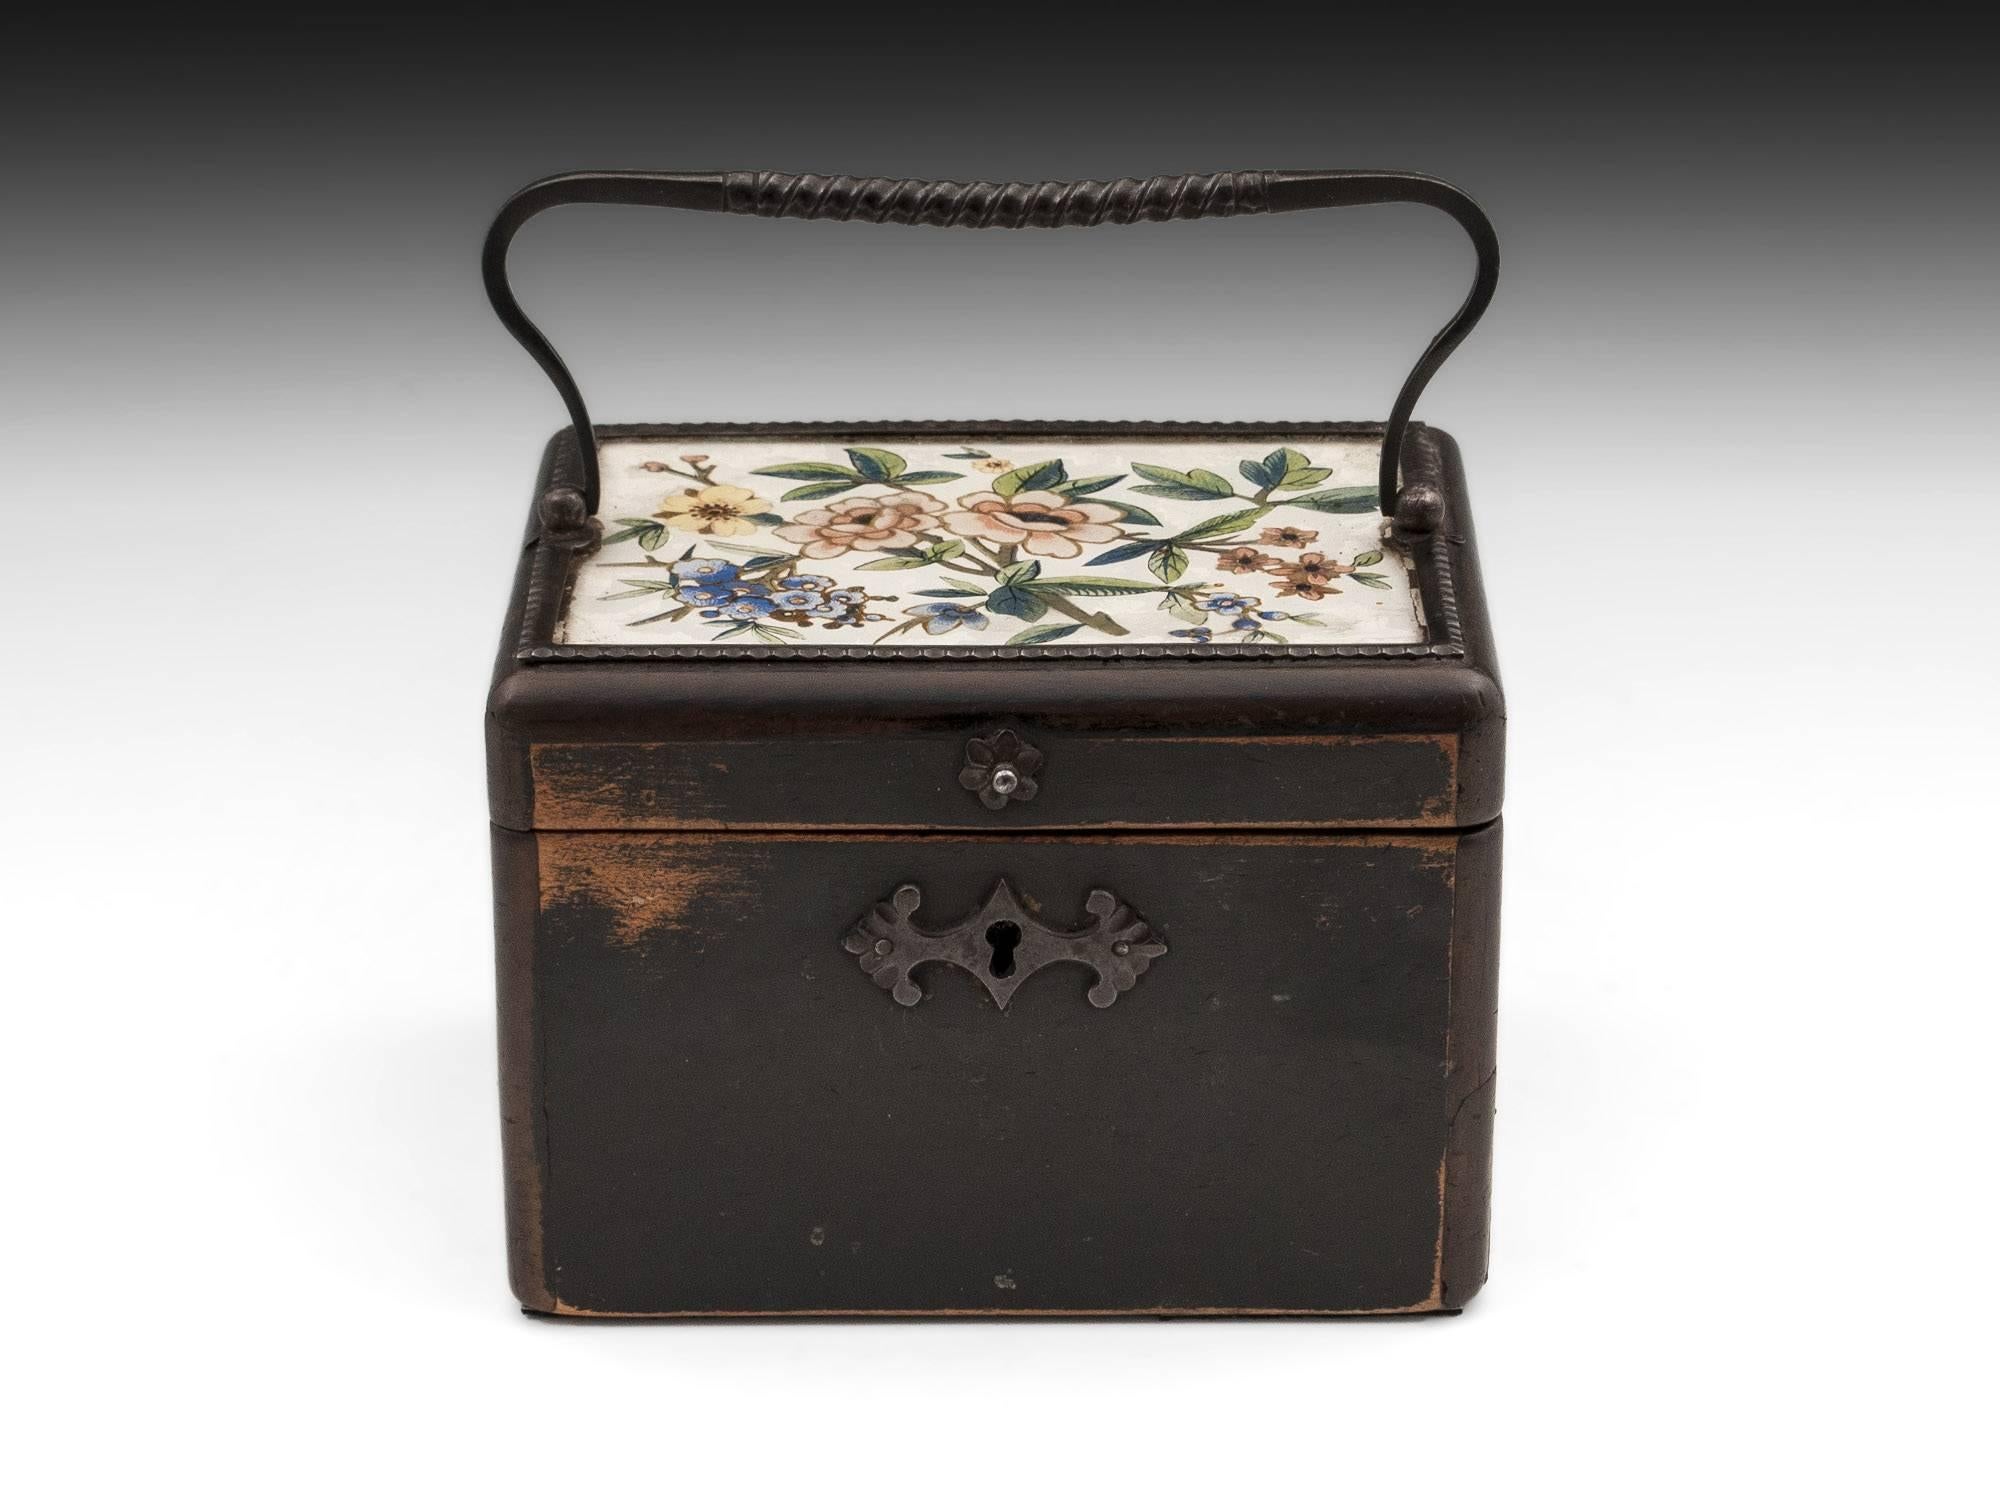 Sycamore tea caddy, floral painted with gold highlights under a glass top. With a cut steel handle, surround, escutcheon and finger pull. 

This wonderful eye-catching sycamore tea caddy is from Hungary and comes complete with fully working lock,